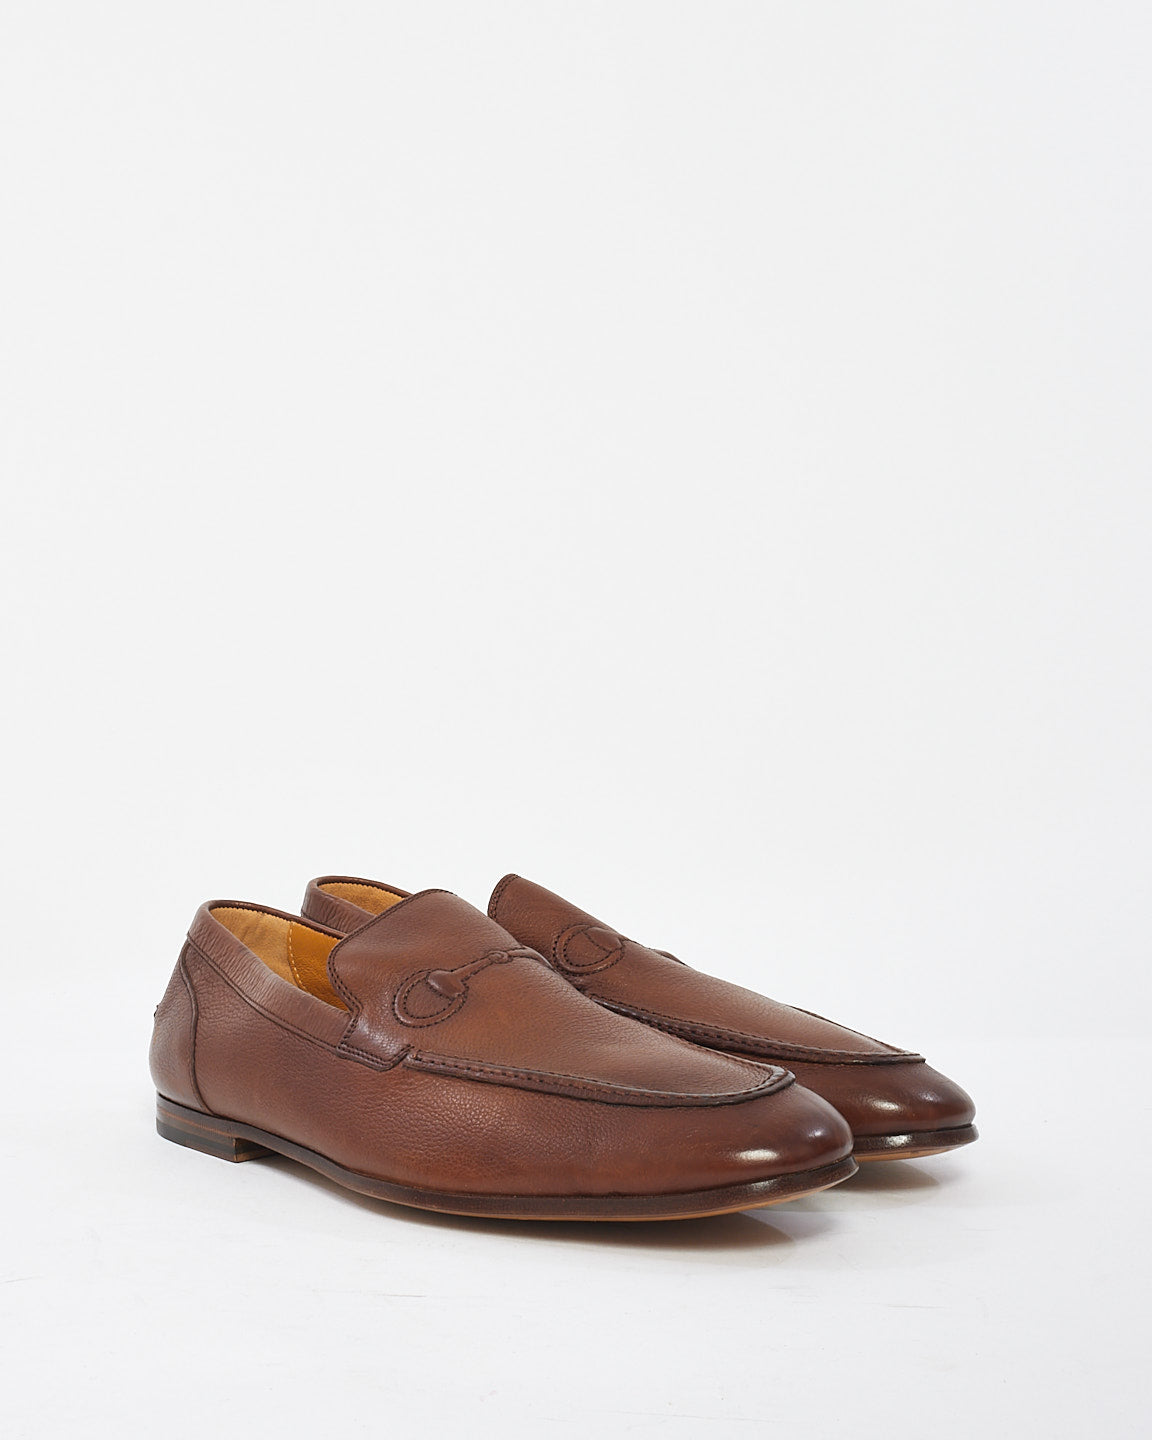 Gucci Men's Brown Leather Horsebit Loafers - 7